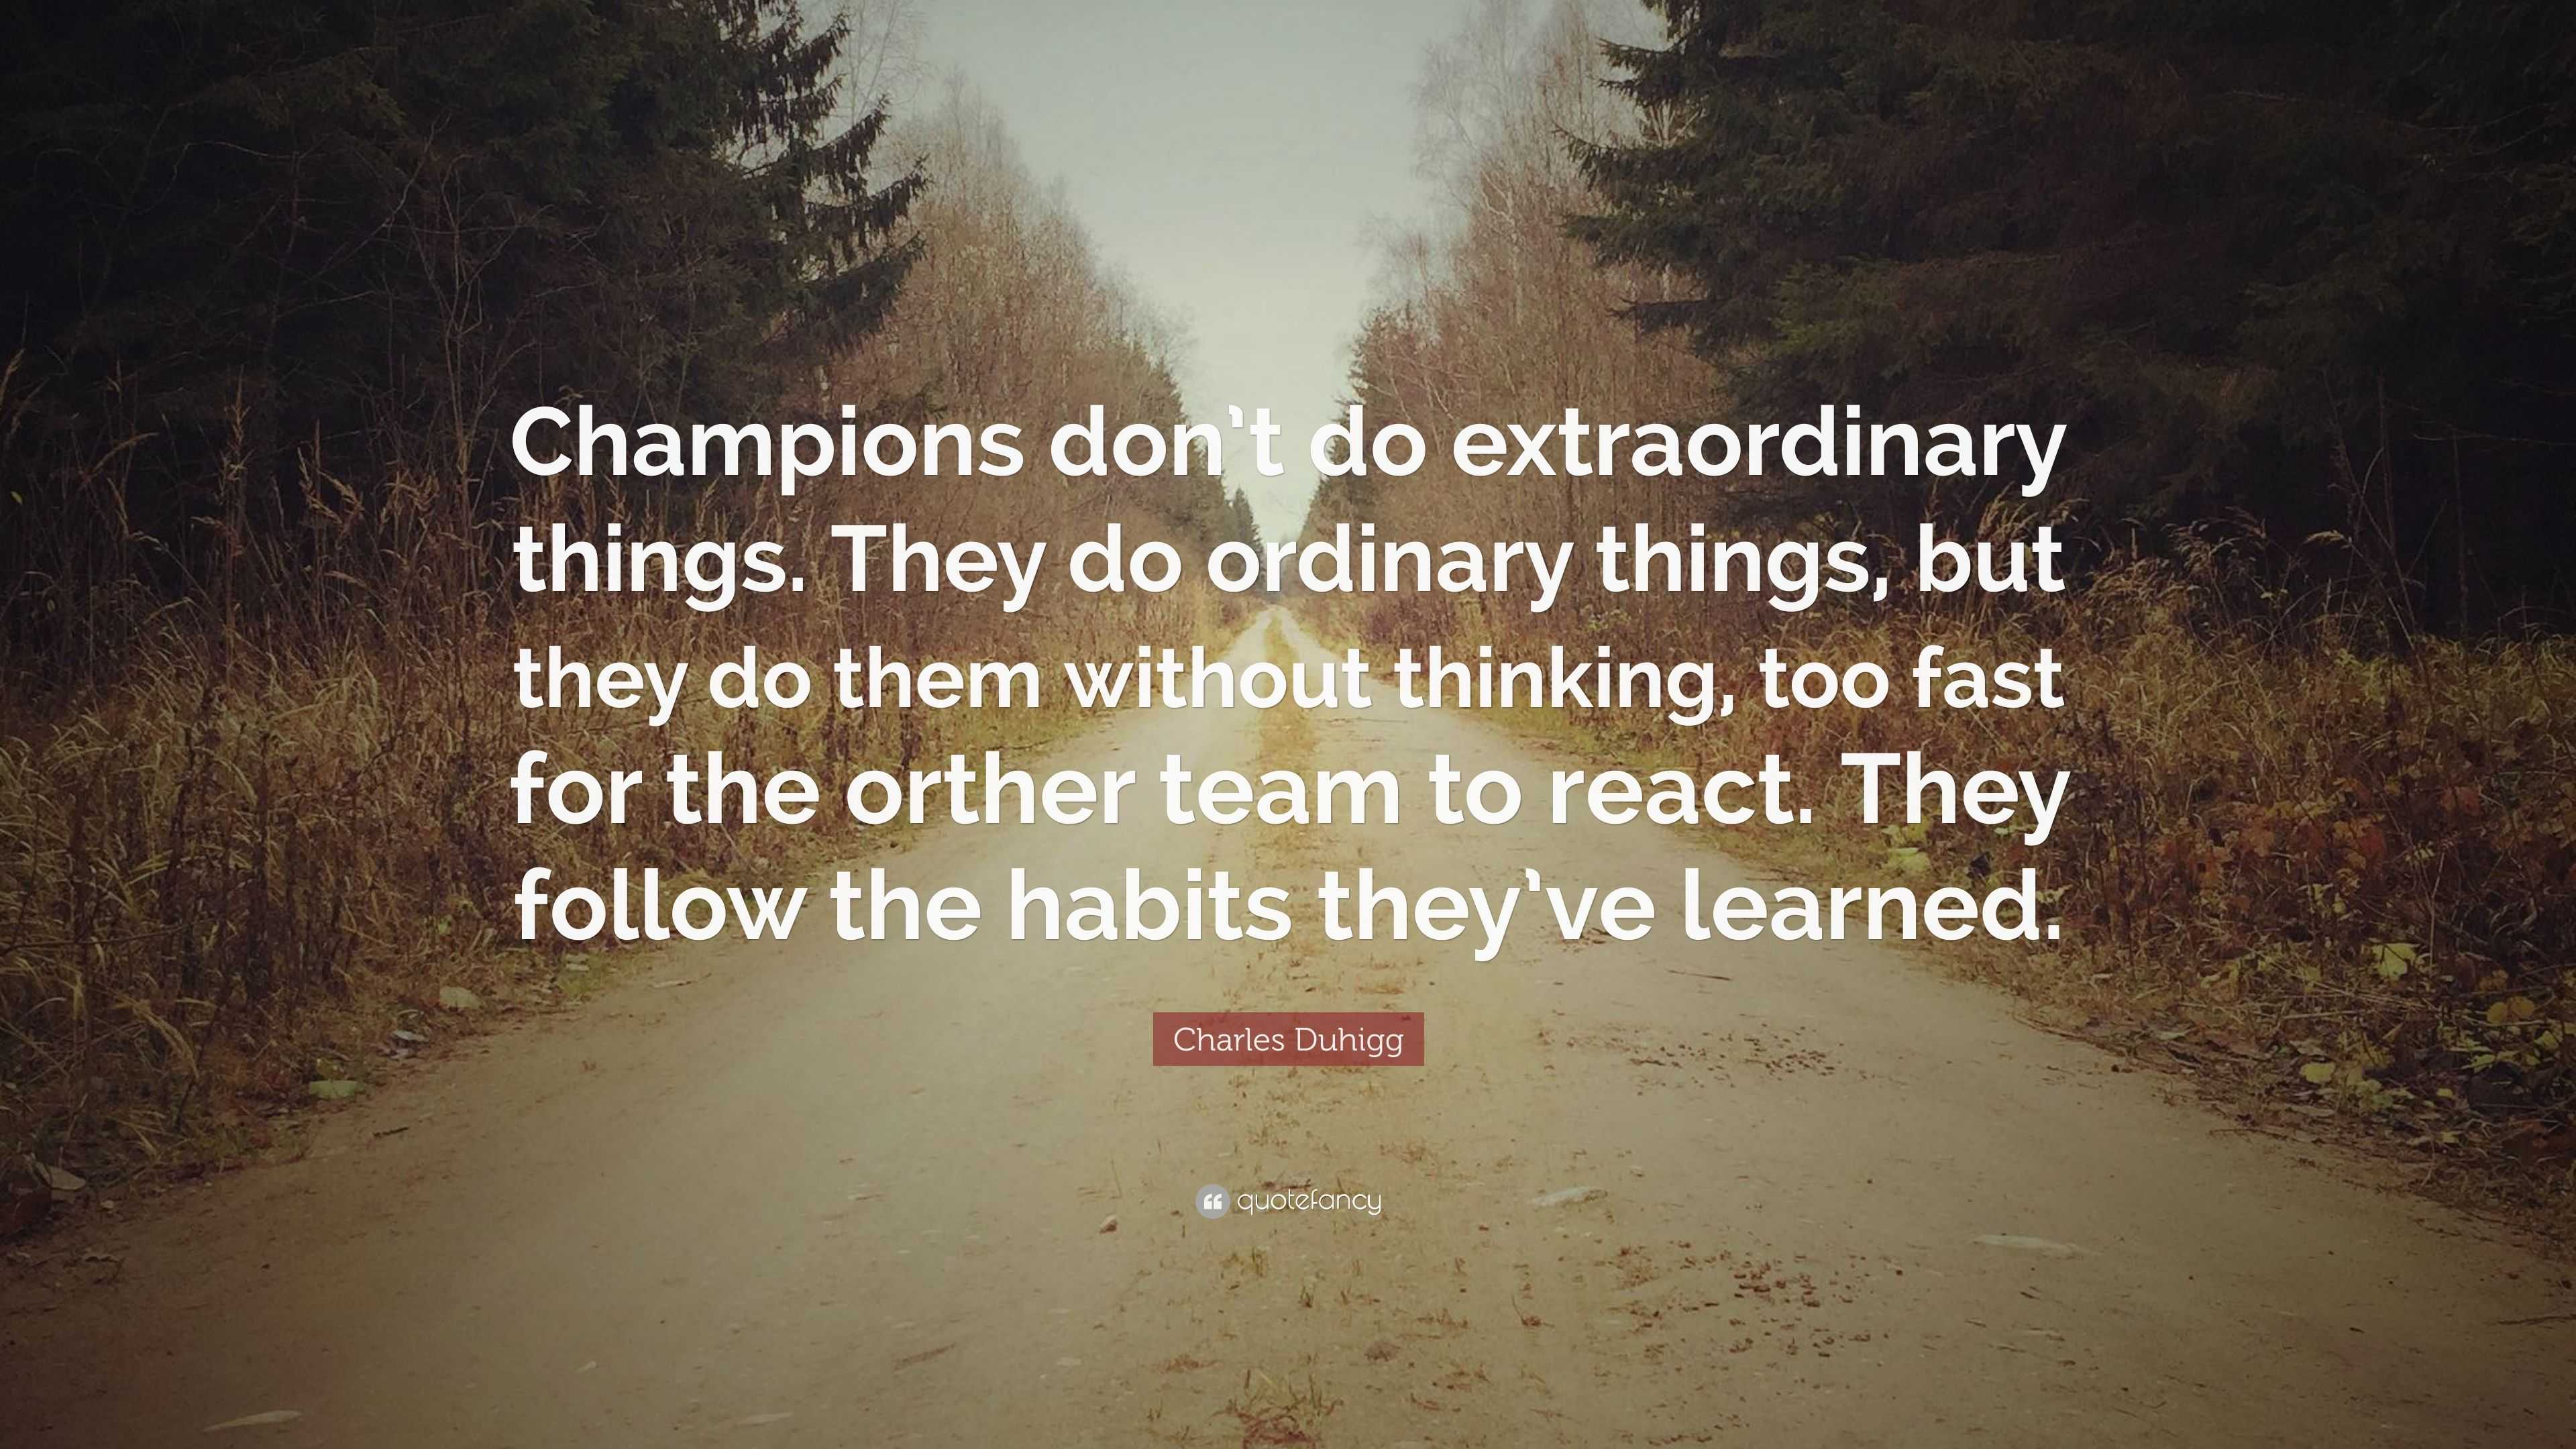 Charles Duhigg Quote: “Champions don’t do extraordinary things. They do